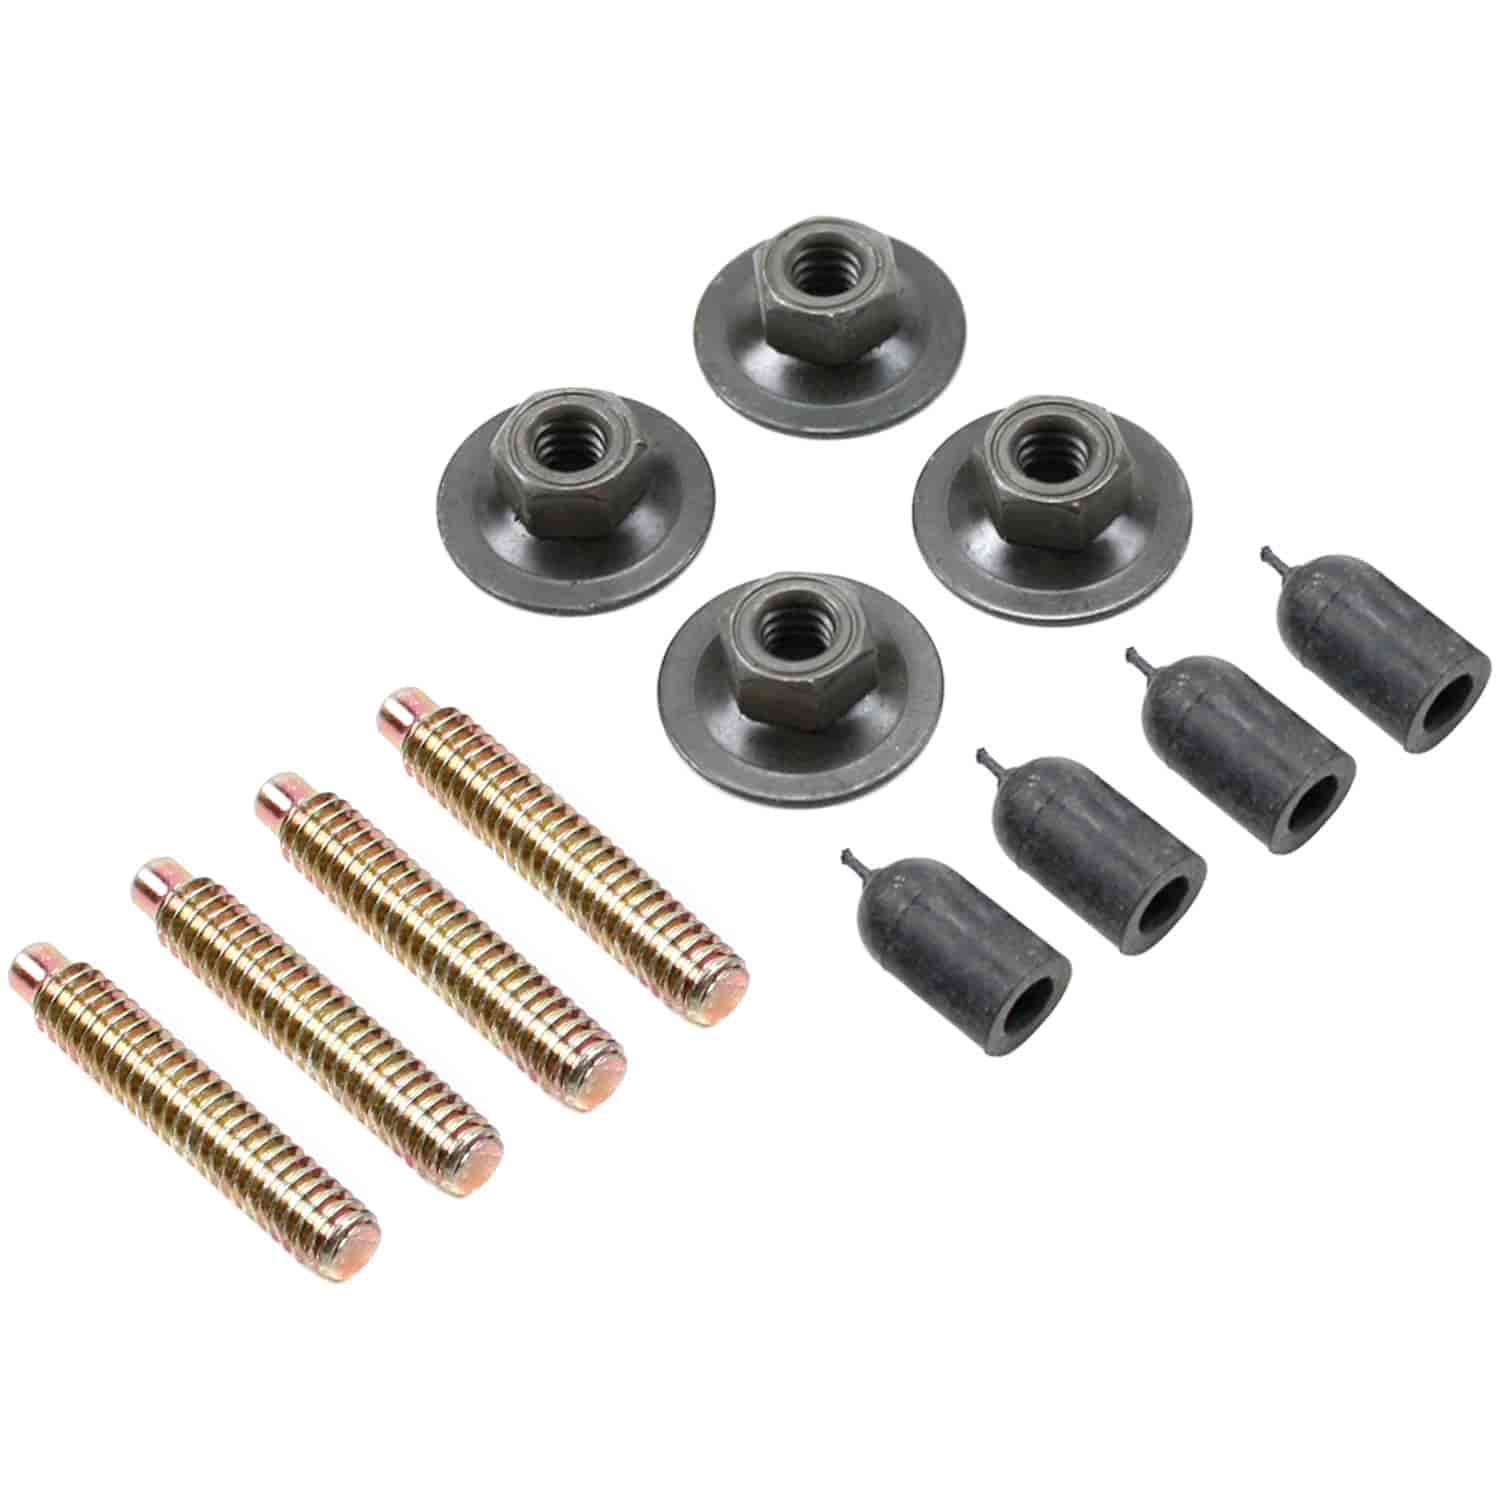 71-73 Mustang Rear Wing Spoiler Mounting Studs for Short